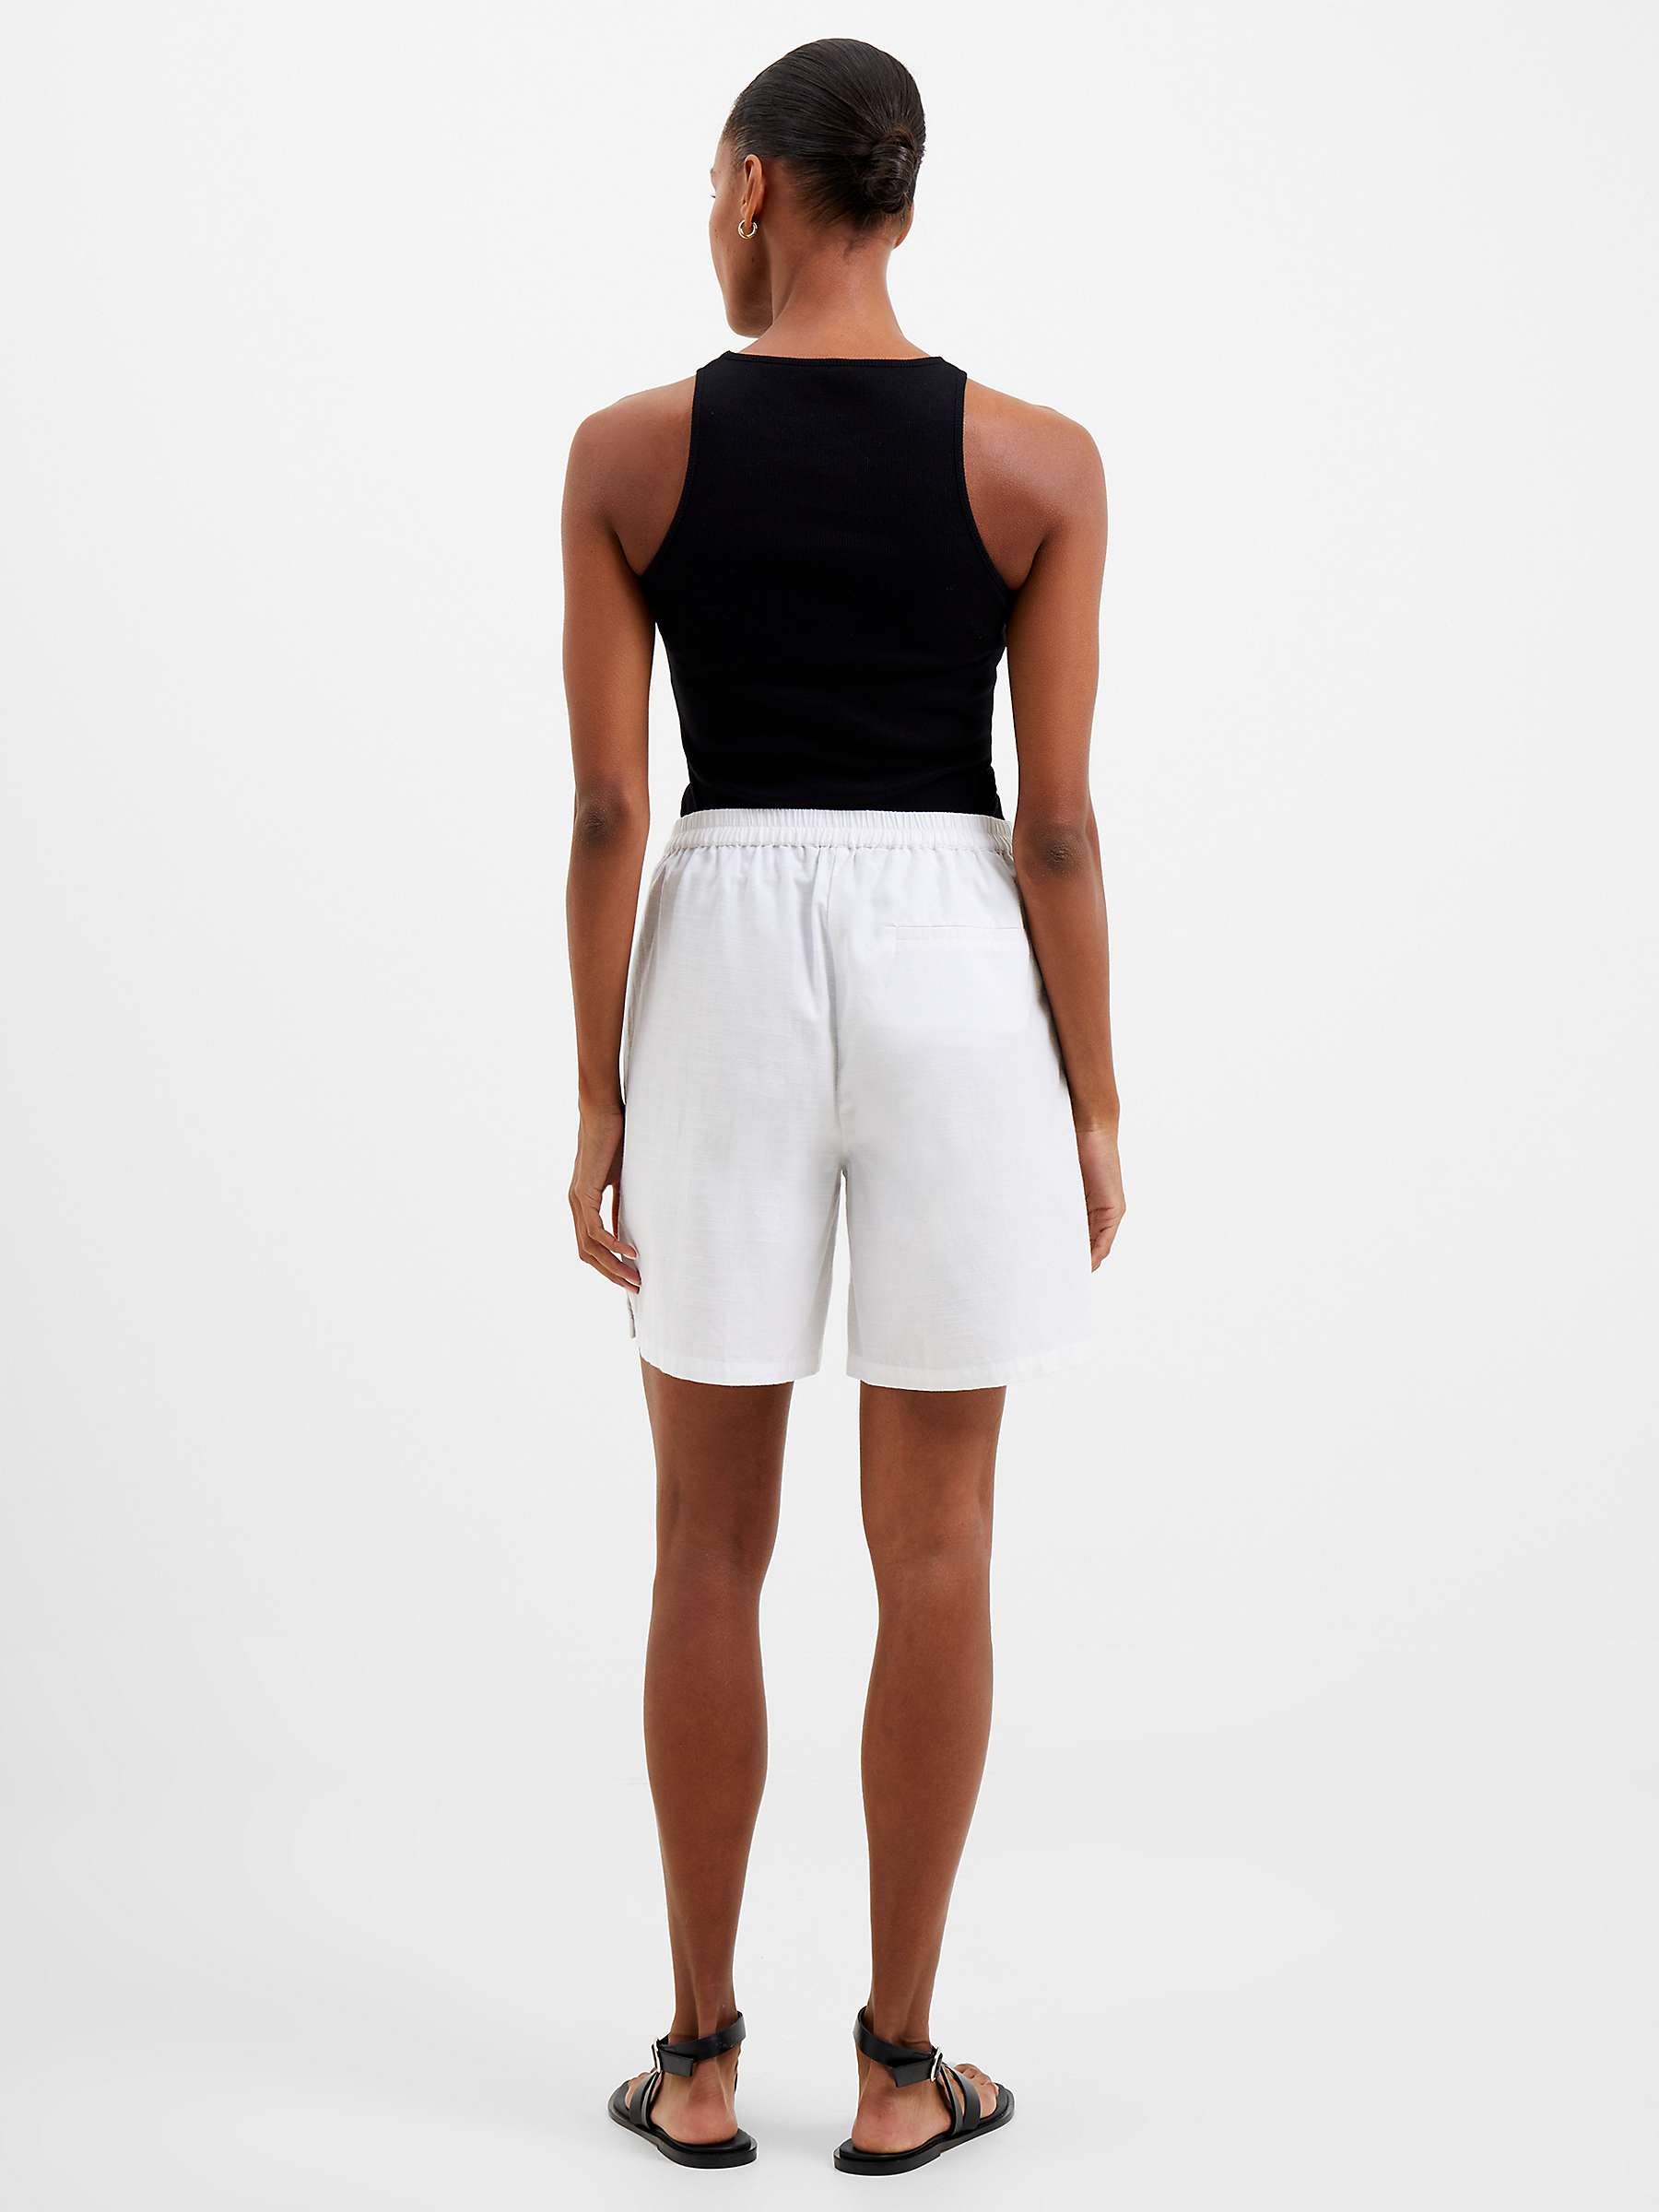 Buy French Connection Alania Lyocell Blend Shorts Online at johnlewis.com